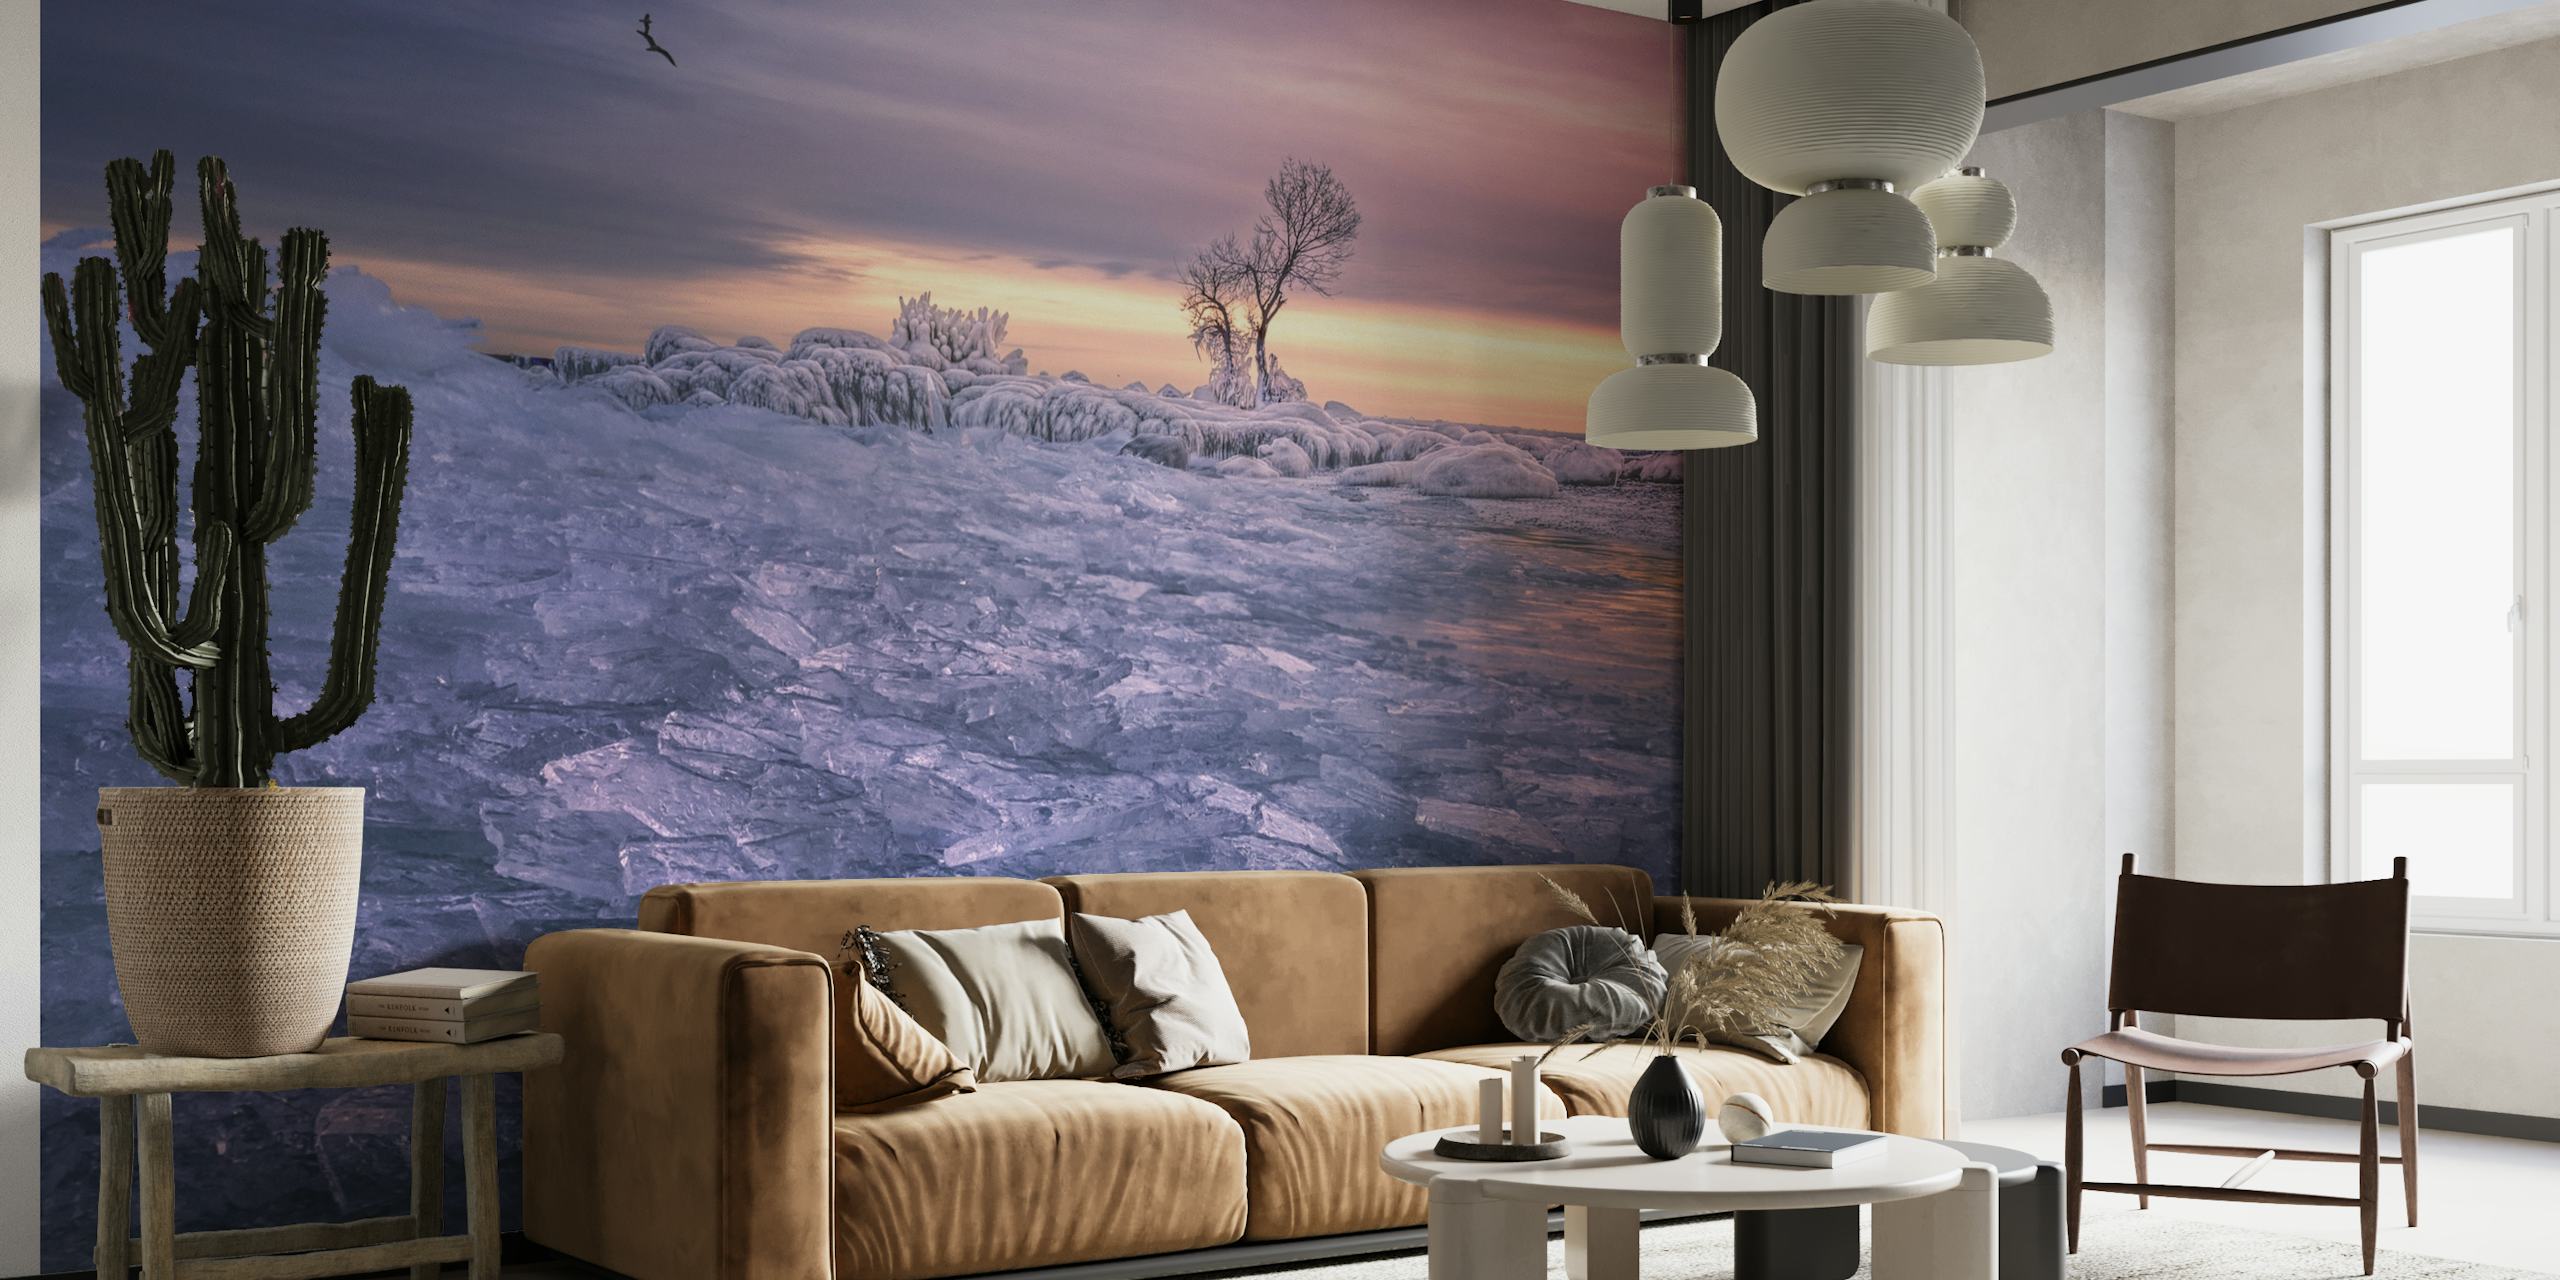 A serene winter scene wall mural with a solitary tree and twilight hues over a frosted landscape.